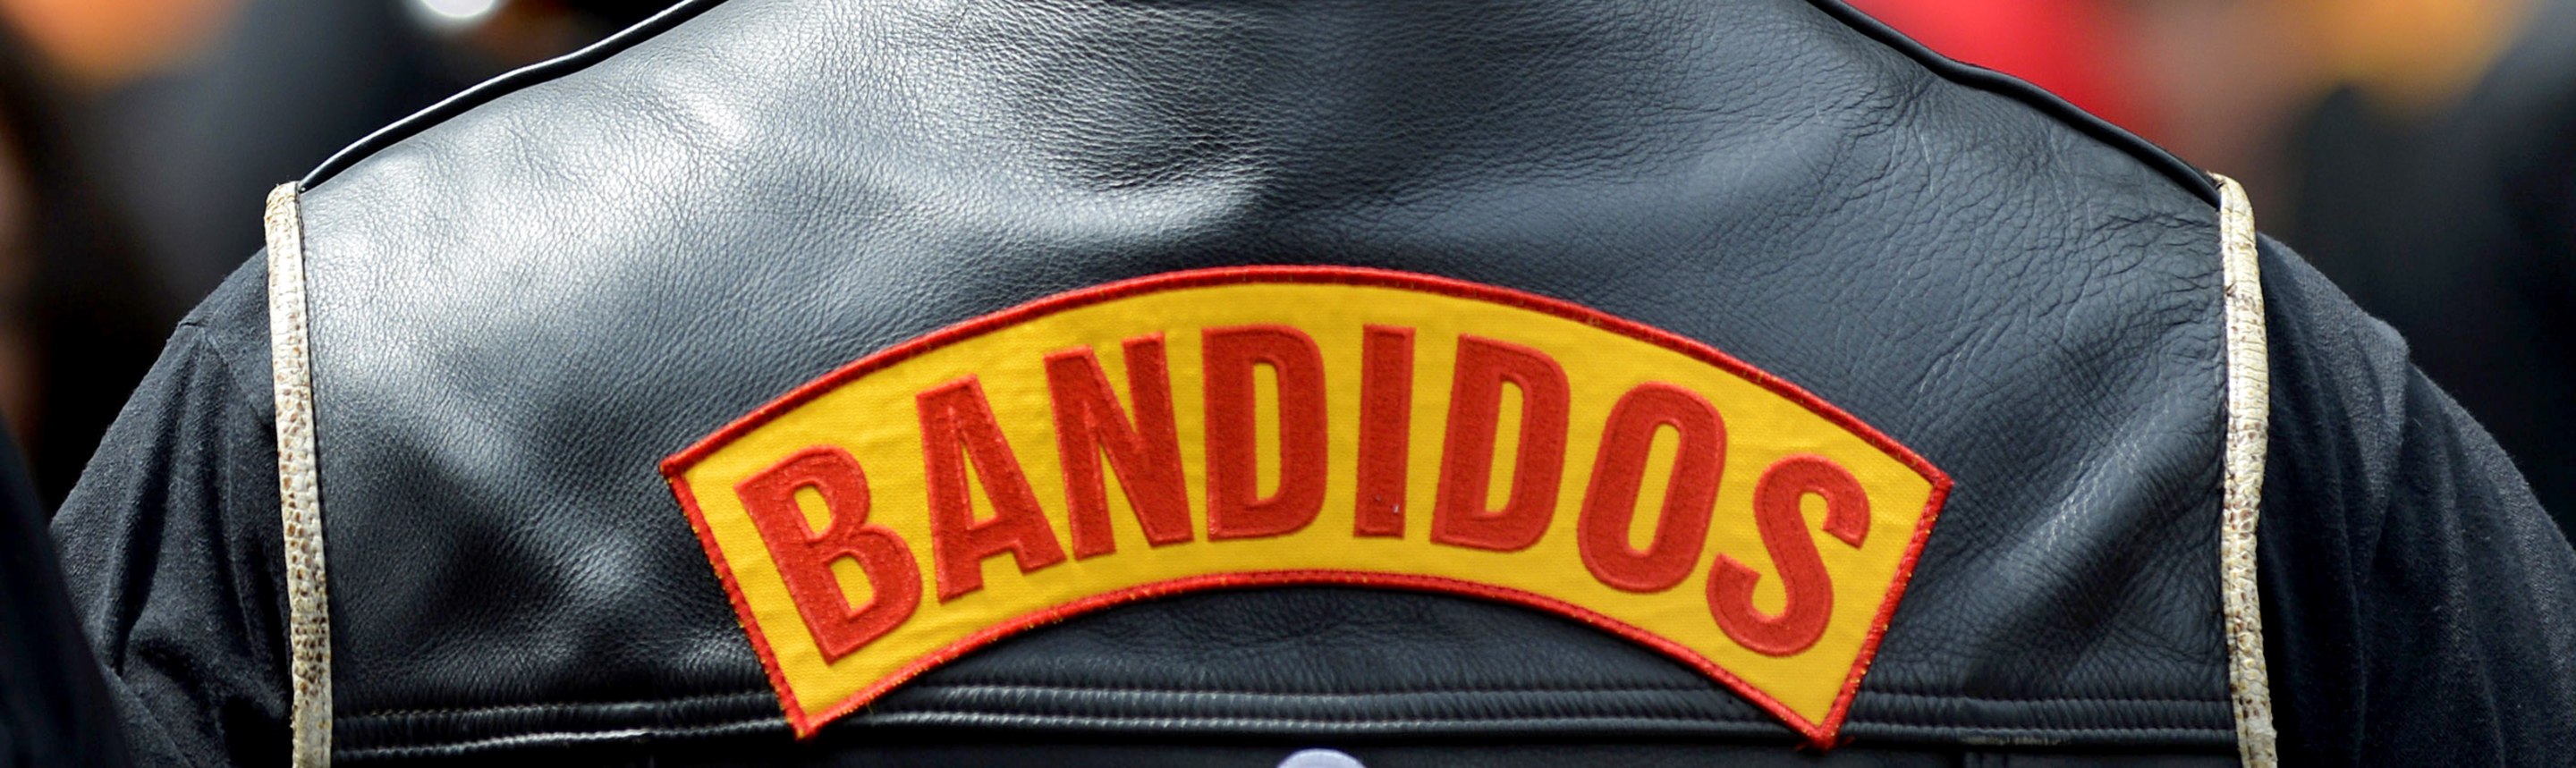 feds-target-bandidos-motorcycle-gang-with-racketeering-indictment-nbc